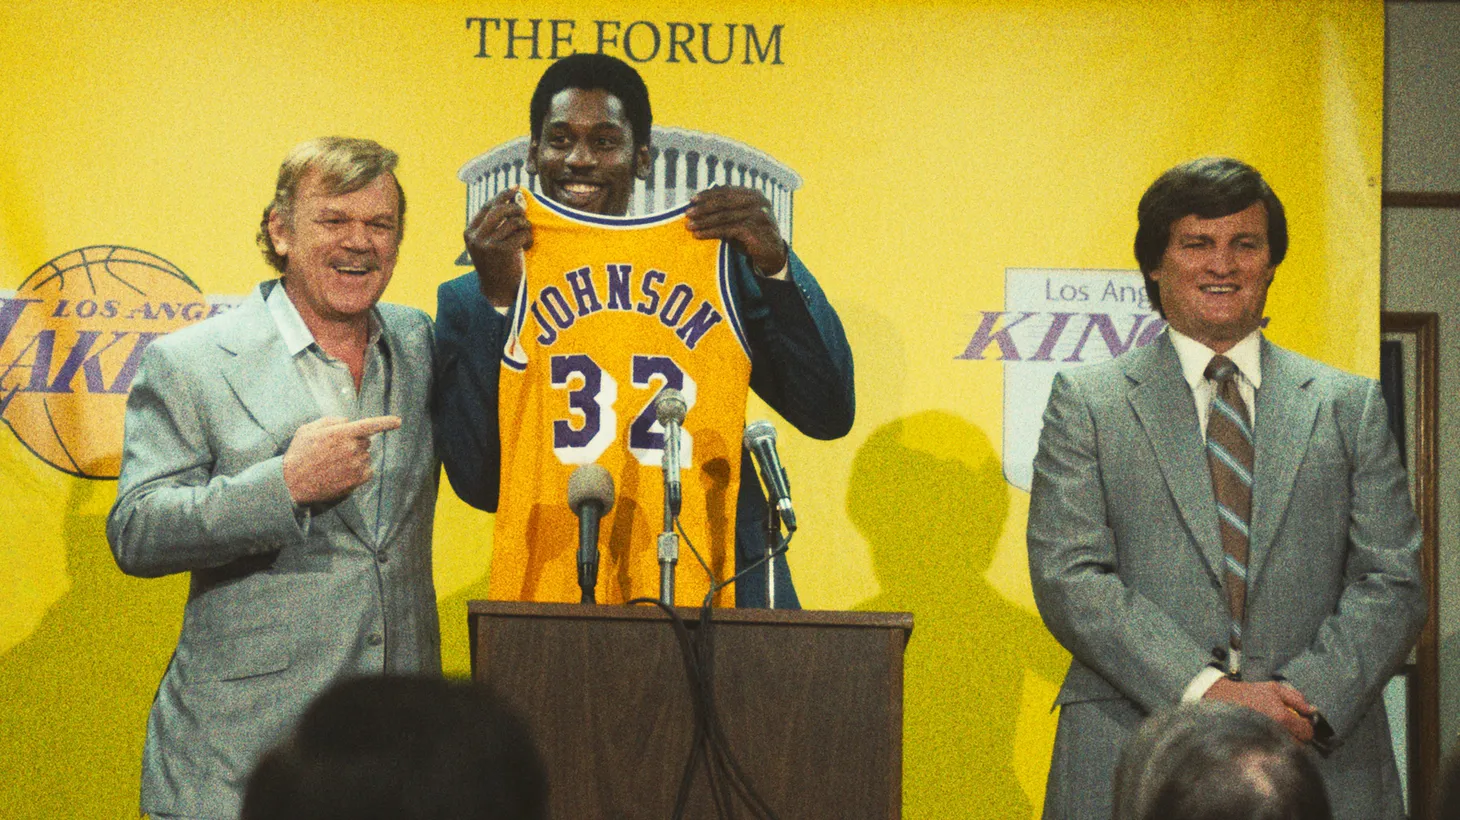 HBO’s “Winning Time” includes longtime actors like John C. Reilly (left), who plays LA Lakers owner Jerry Buss, and new talent like Quincy Isaiah (center), who plays Ervin “Magic” Johnson.